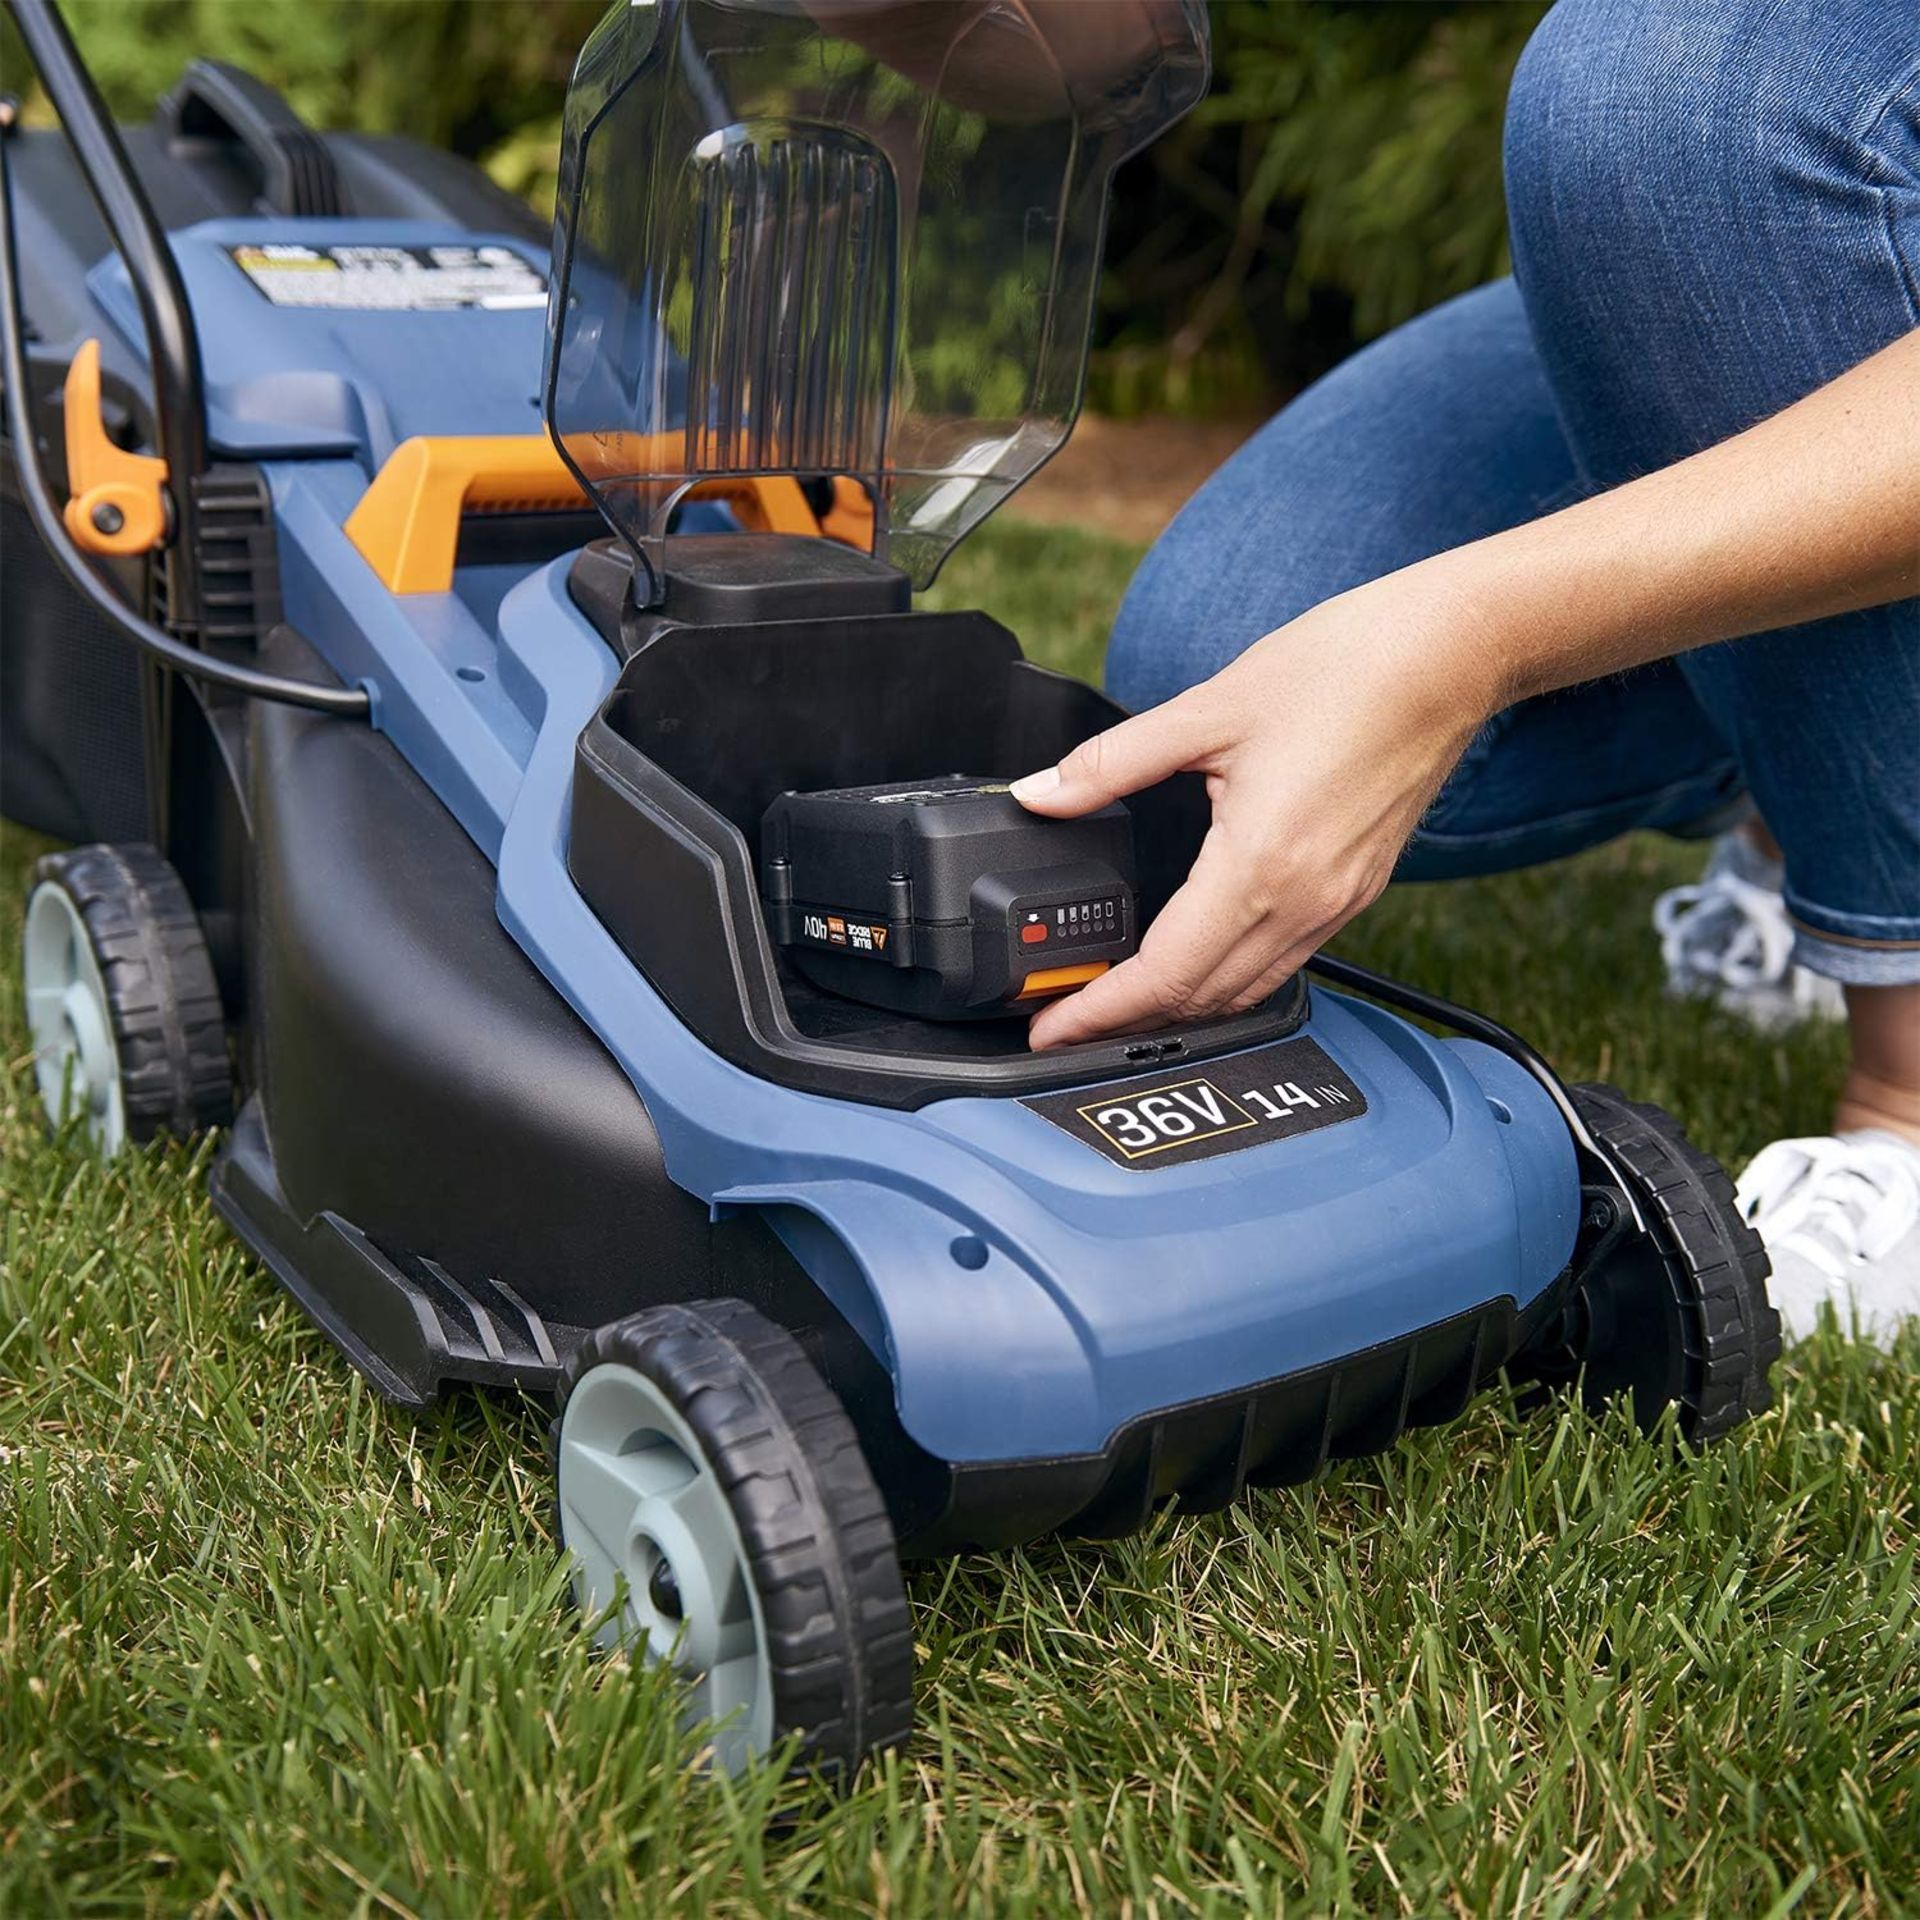 2x NEW & BOXED BLUE RIDGE 36V Cordless Lawnmower with 2.0 Ah Li-ion Battery. RRP £229 EACH. Powerful - Image 4 of 5